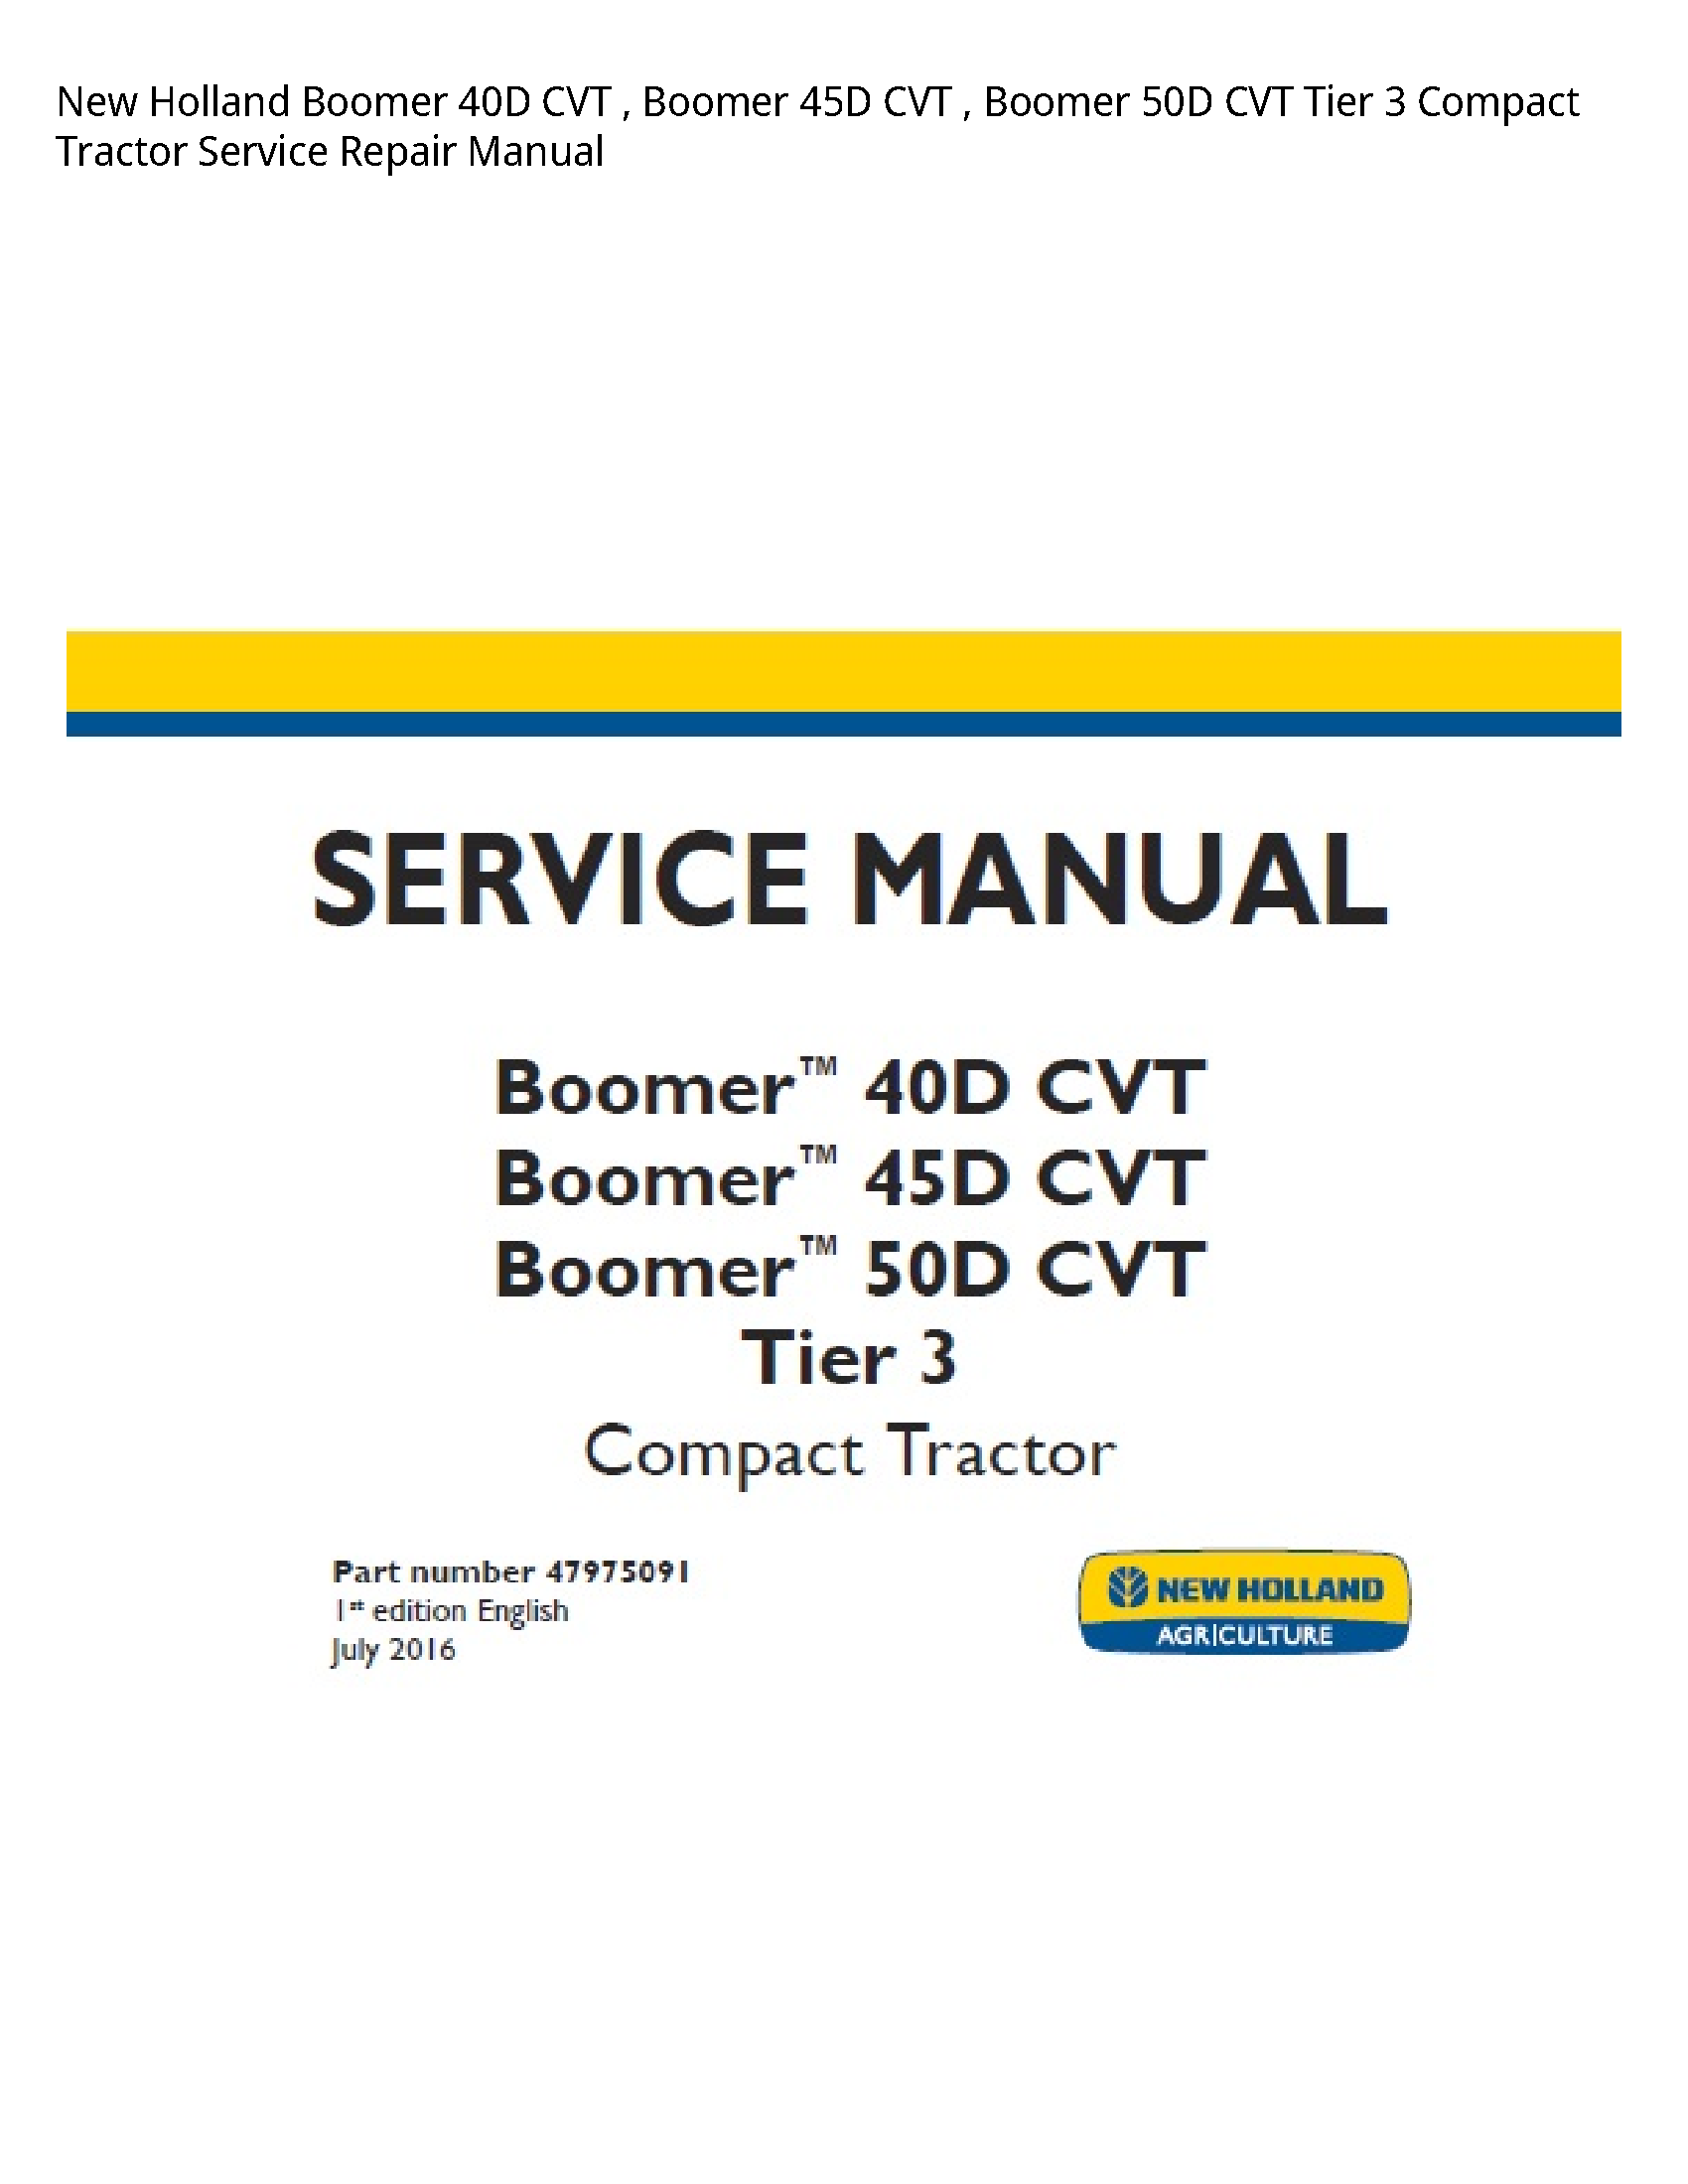 New Holland 40D Boomer CVT Boomer CVT Boomer CVT Tier Compact Tractor manual